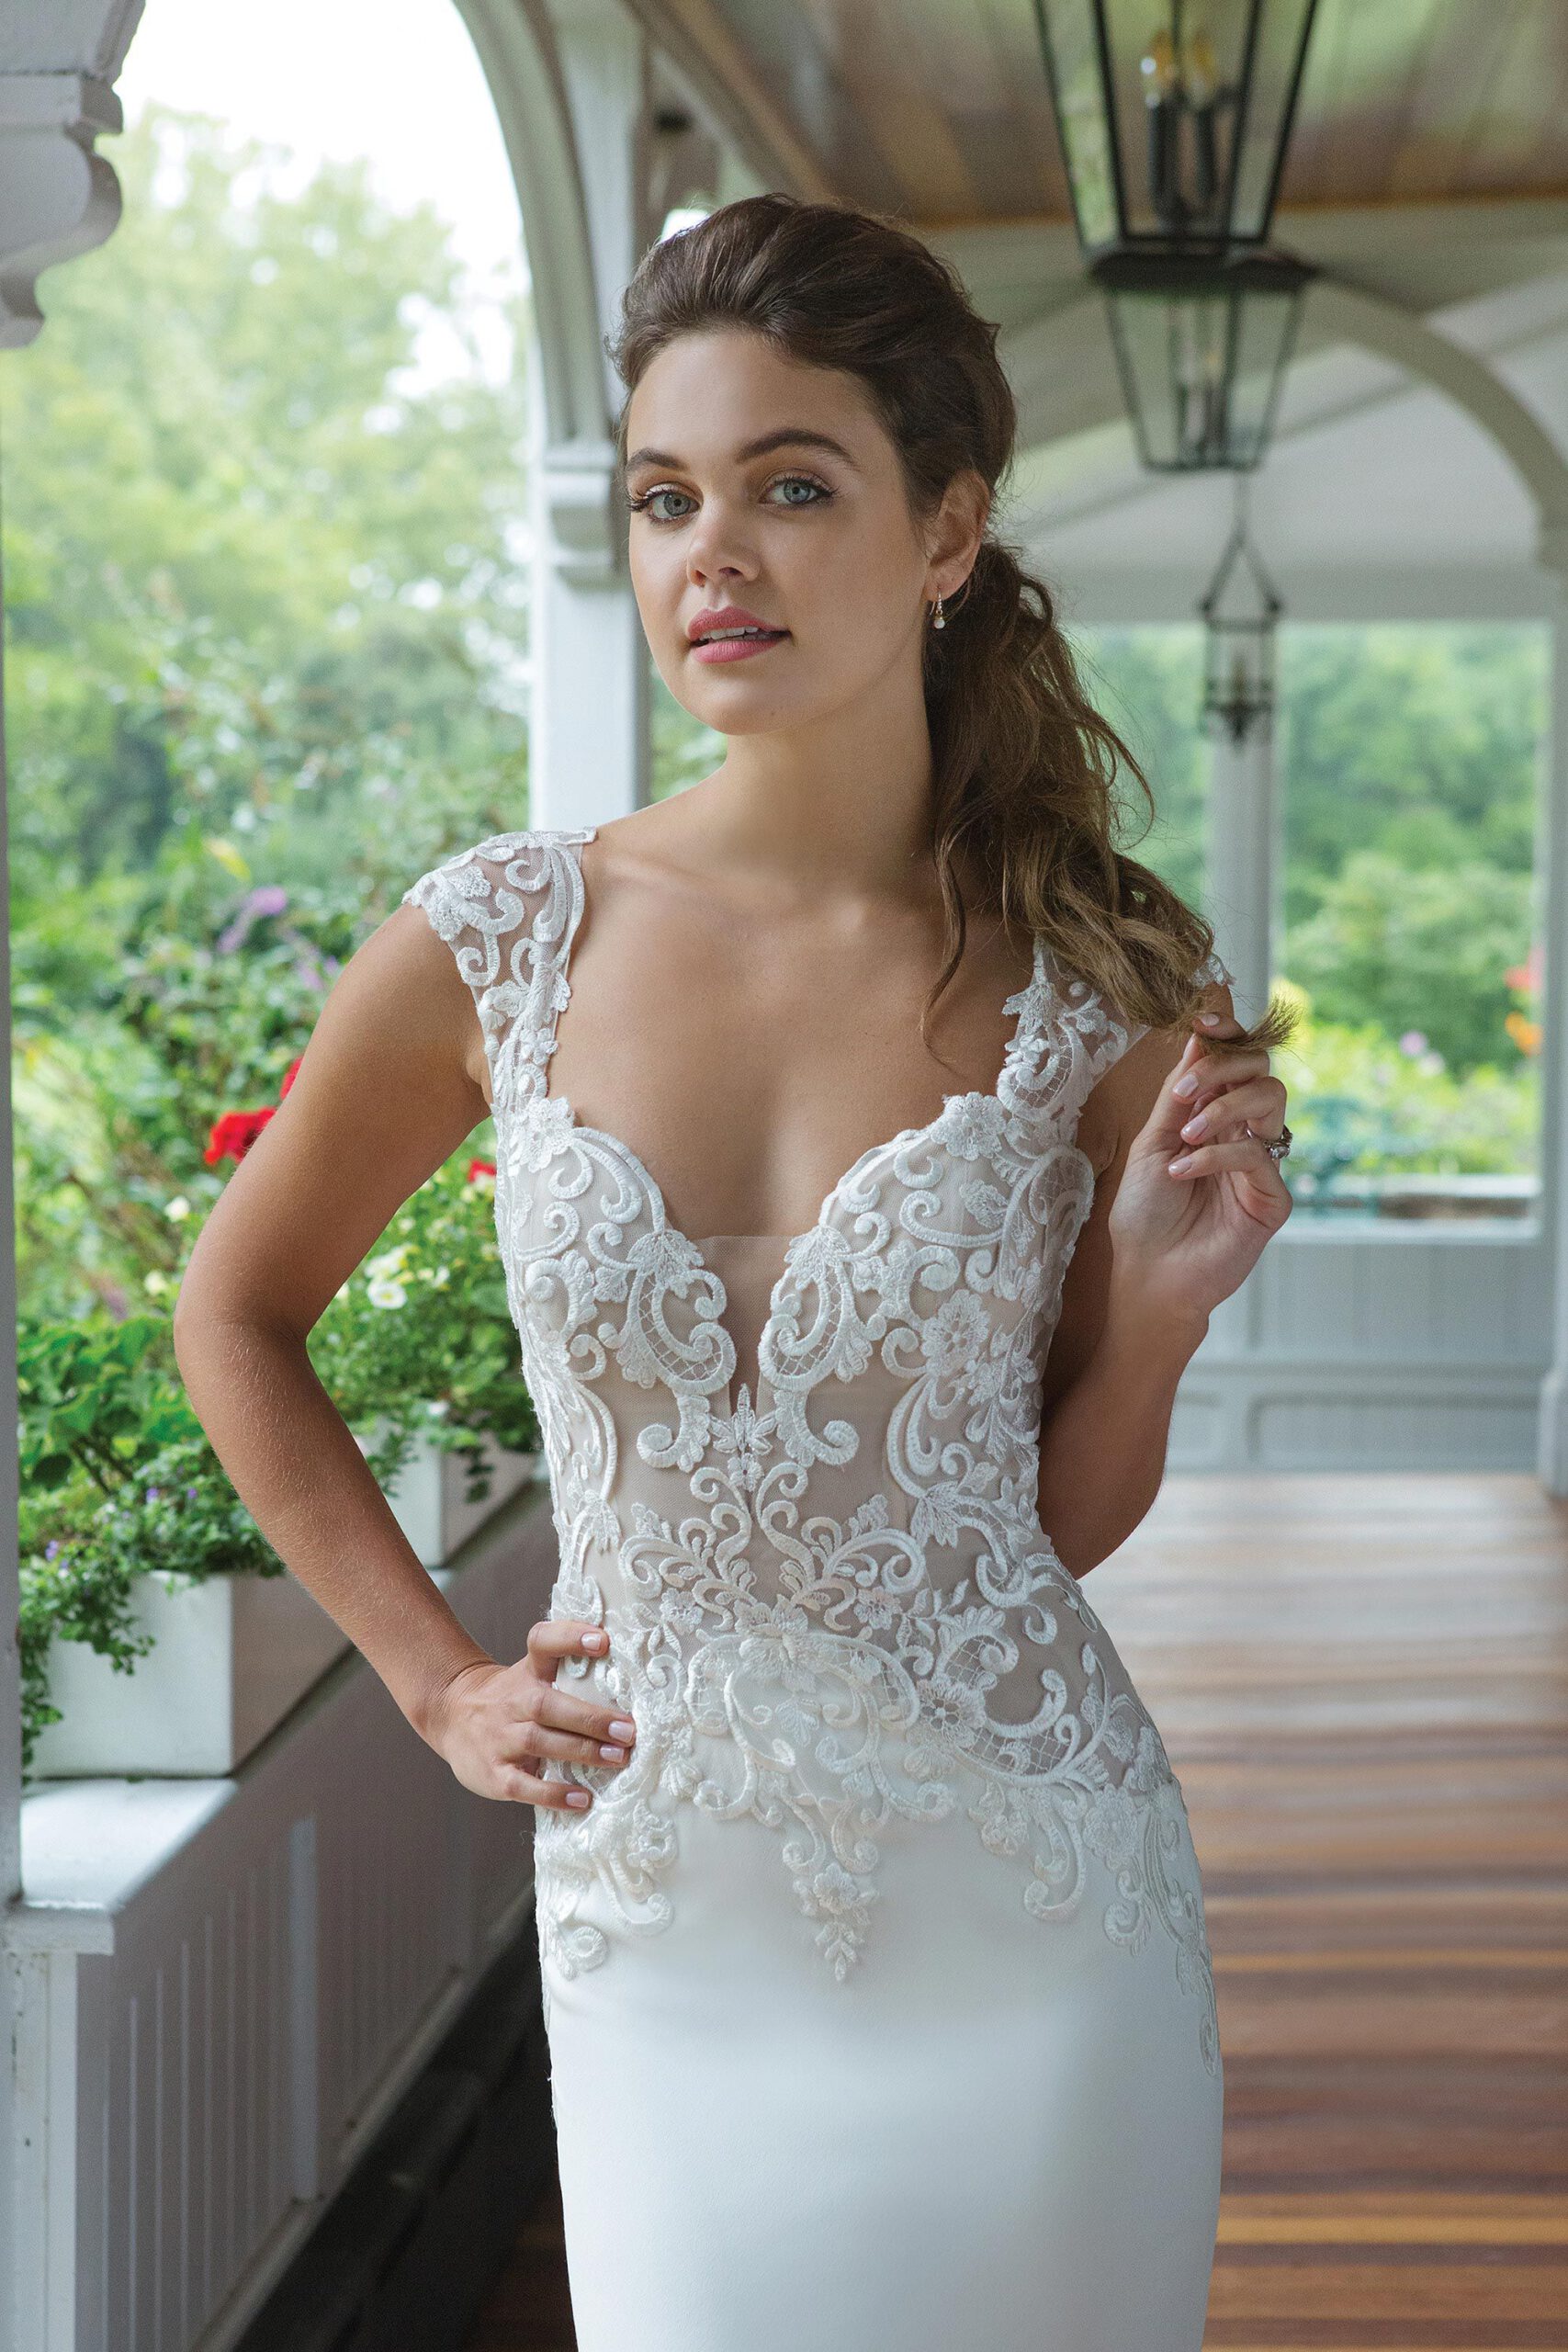 outlet-wedding-dress-11049-Sweetheart-Gowns-sublime-wedding-shop